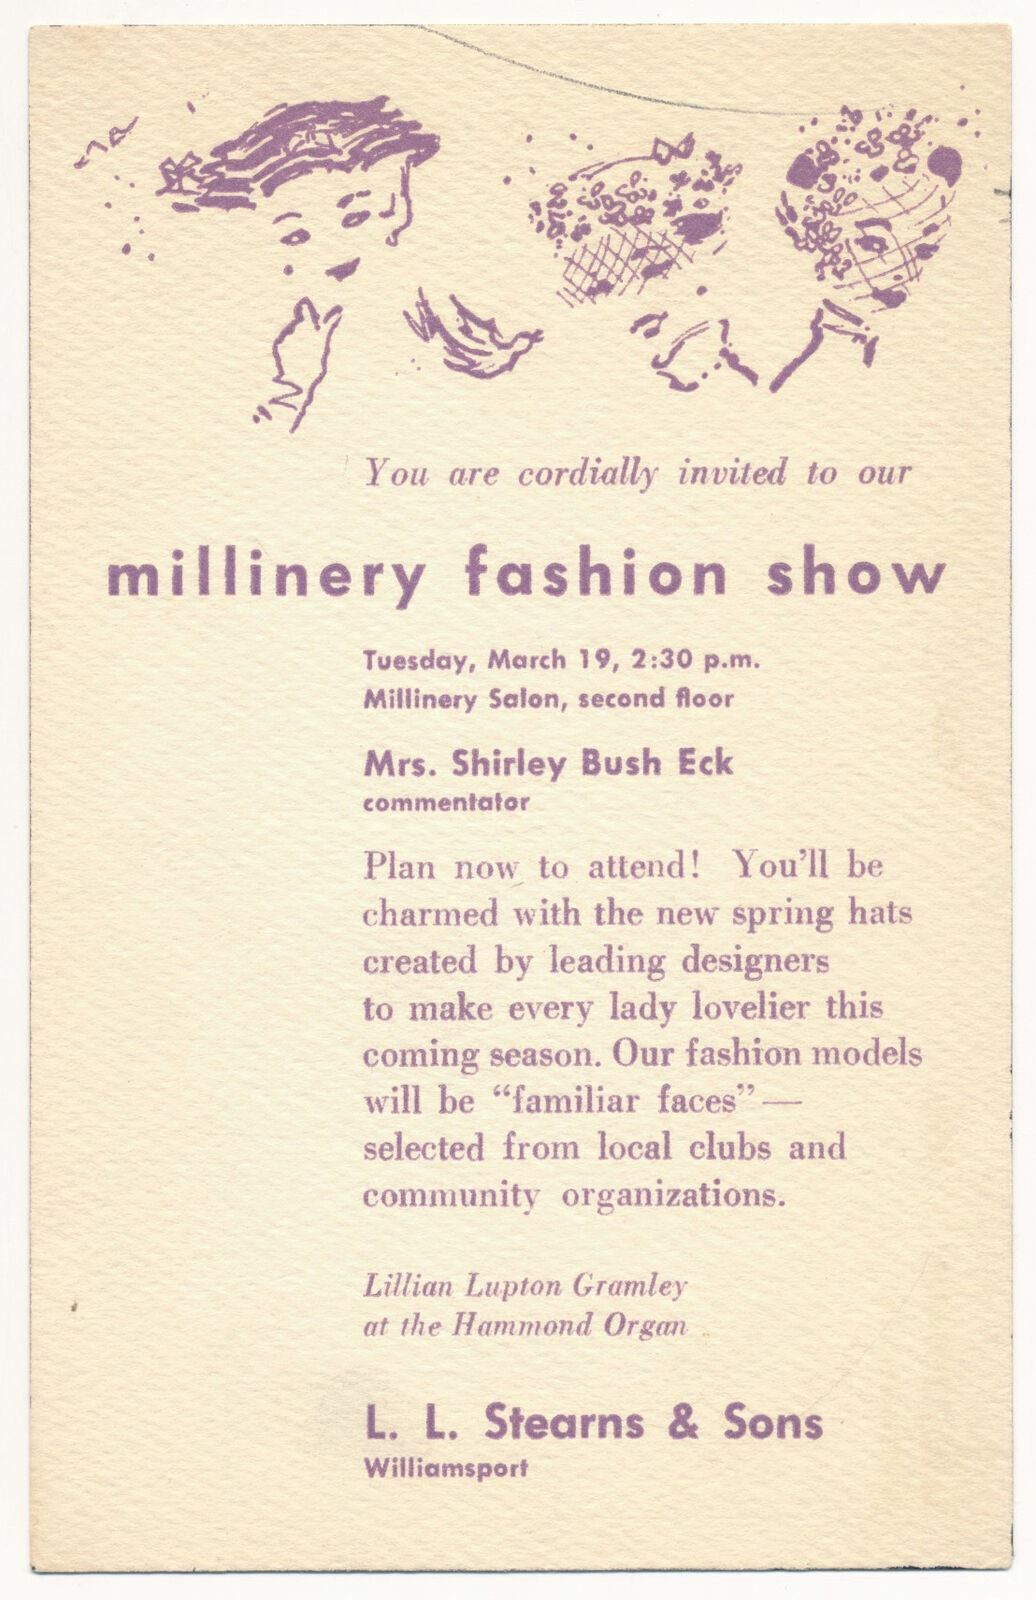 Millinery Fashion Show, L.L. Stearns & Sons Department Sore, Williamsport, PA